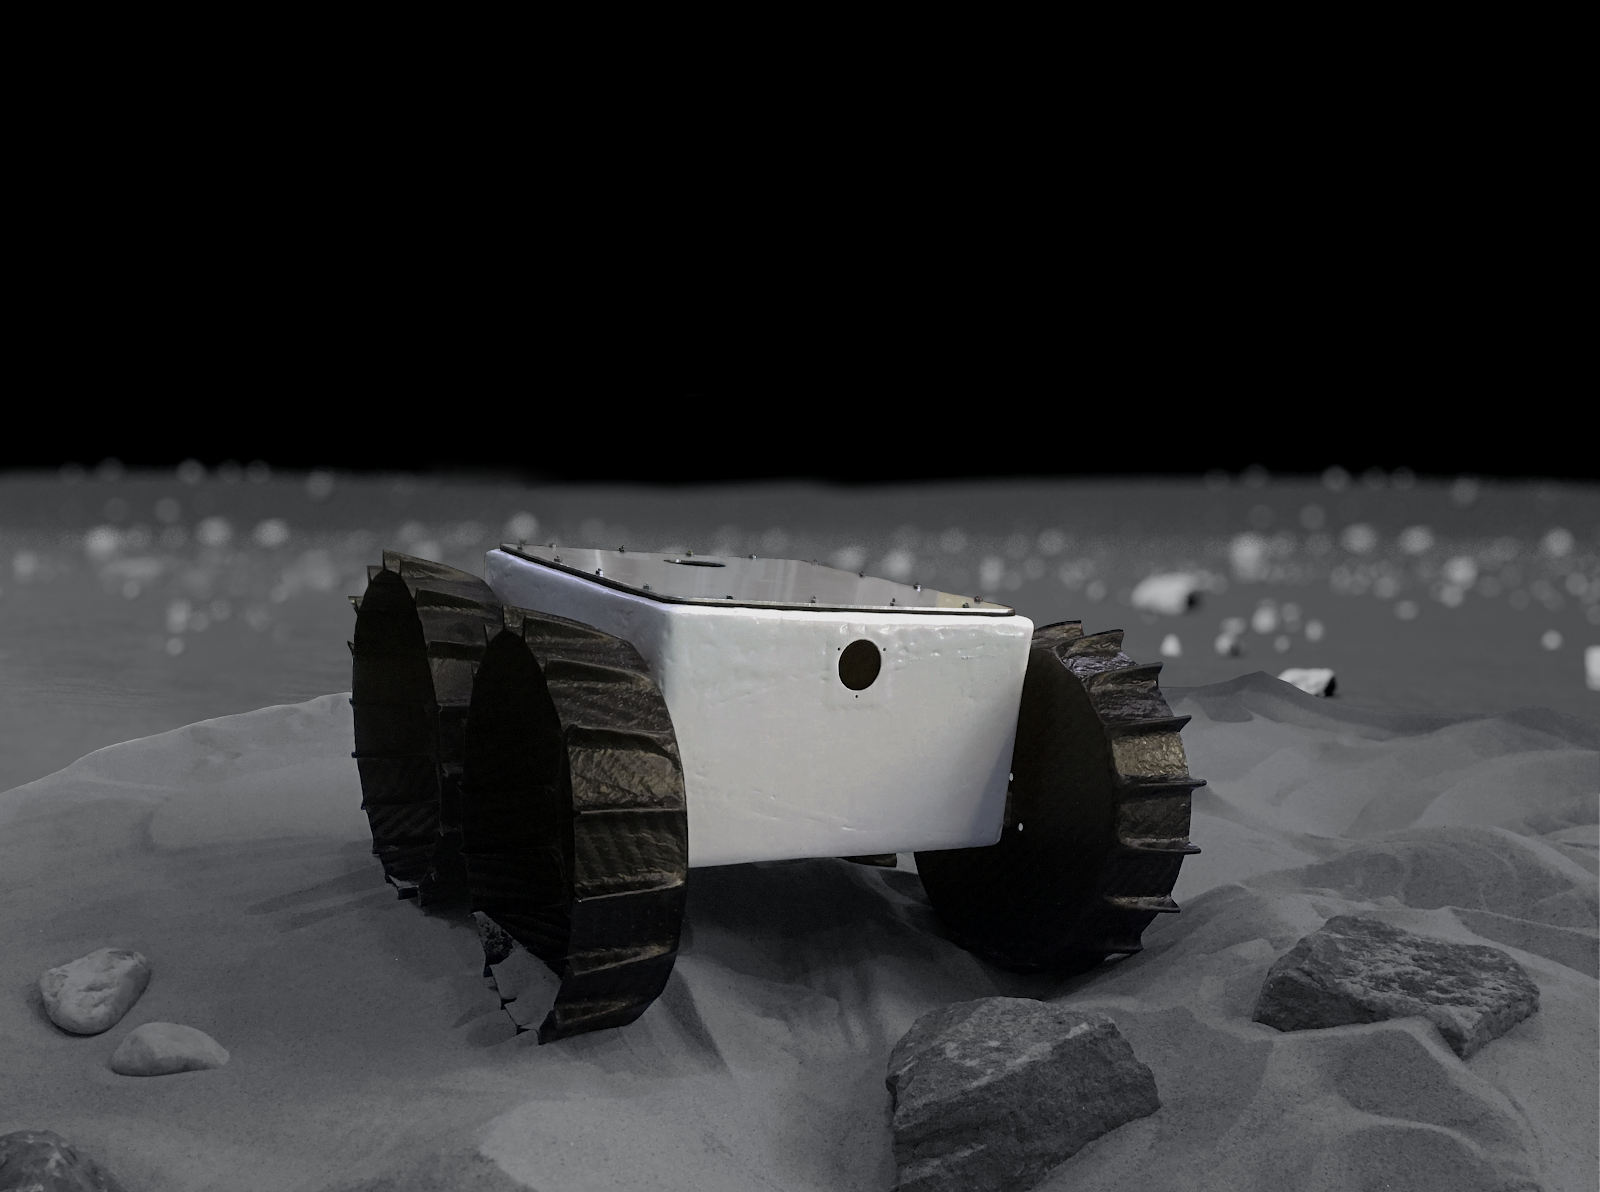 Puny, easy moon rovers will bring cubesat science to the lunar floor